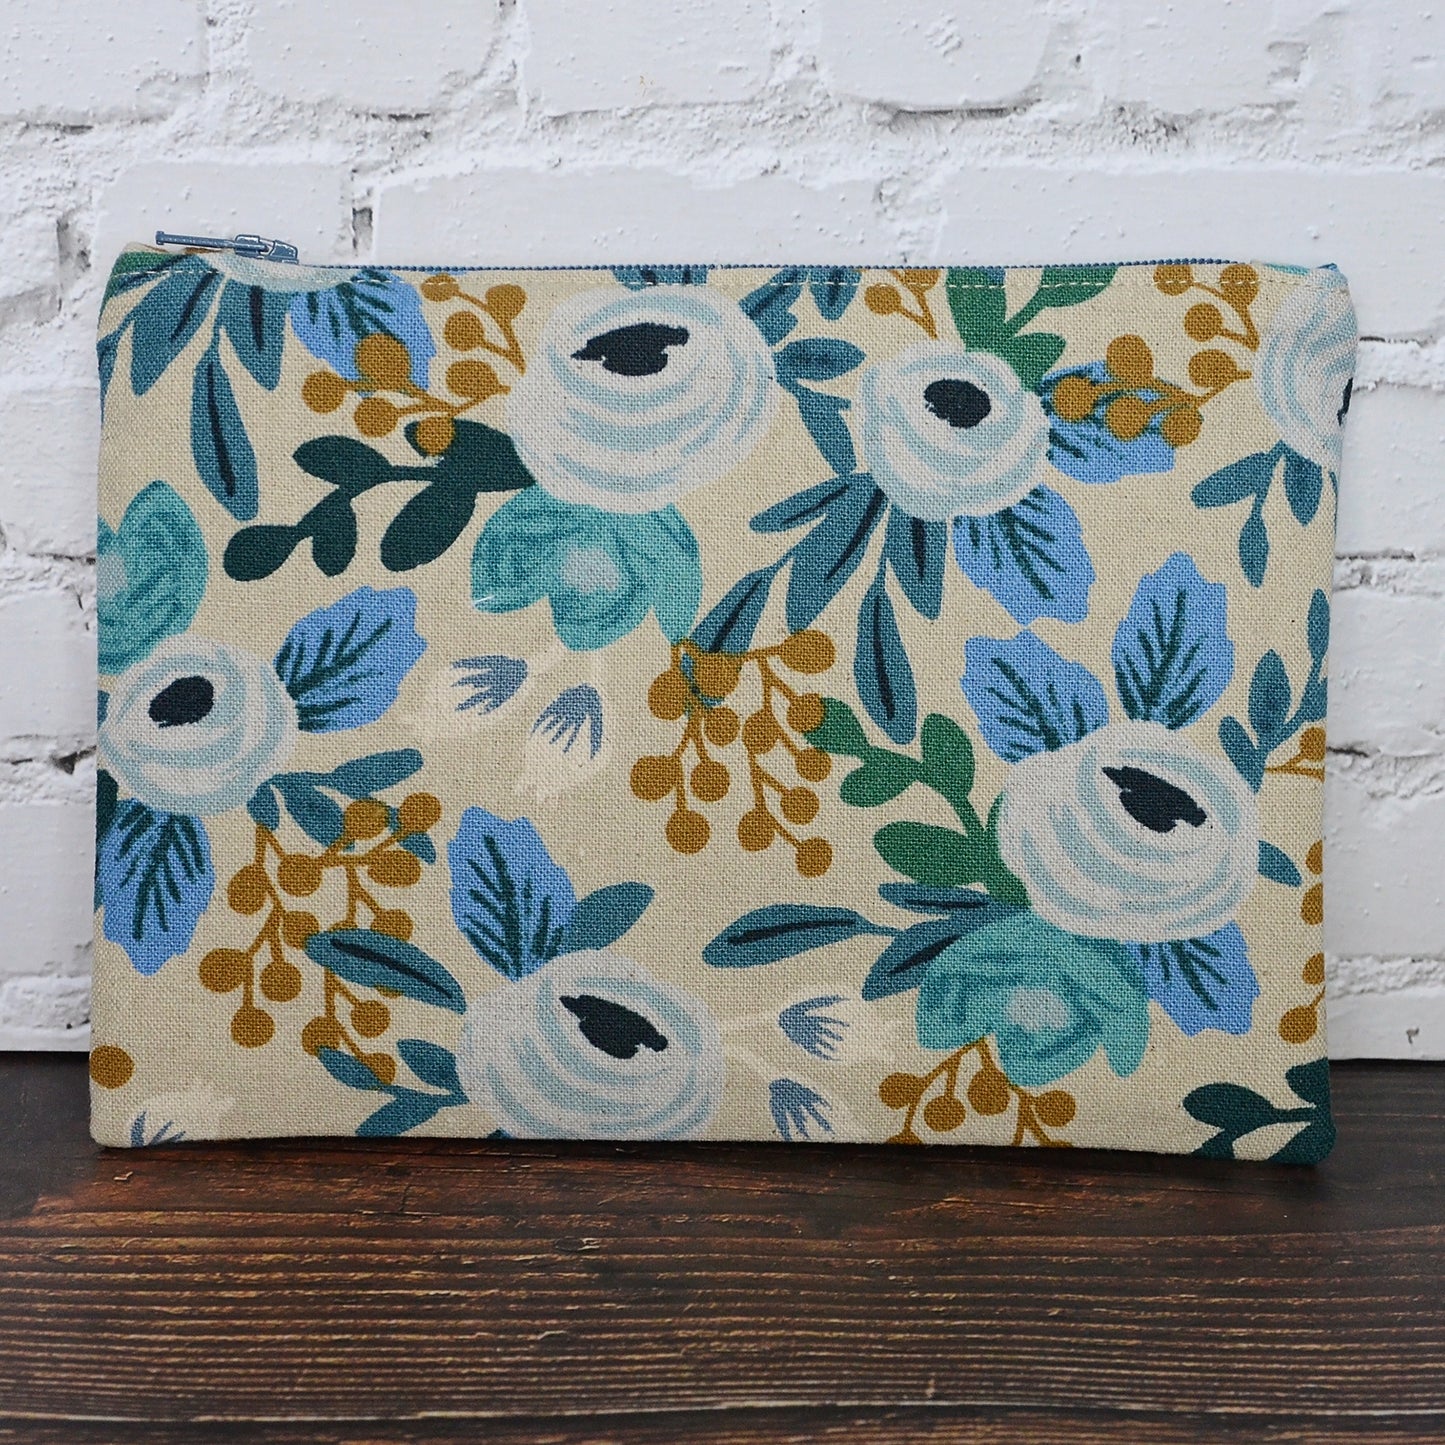 Unbleached Rifle Paper Co zippered pouch.  Made in Nova Scotia.